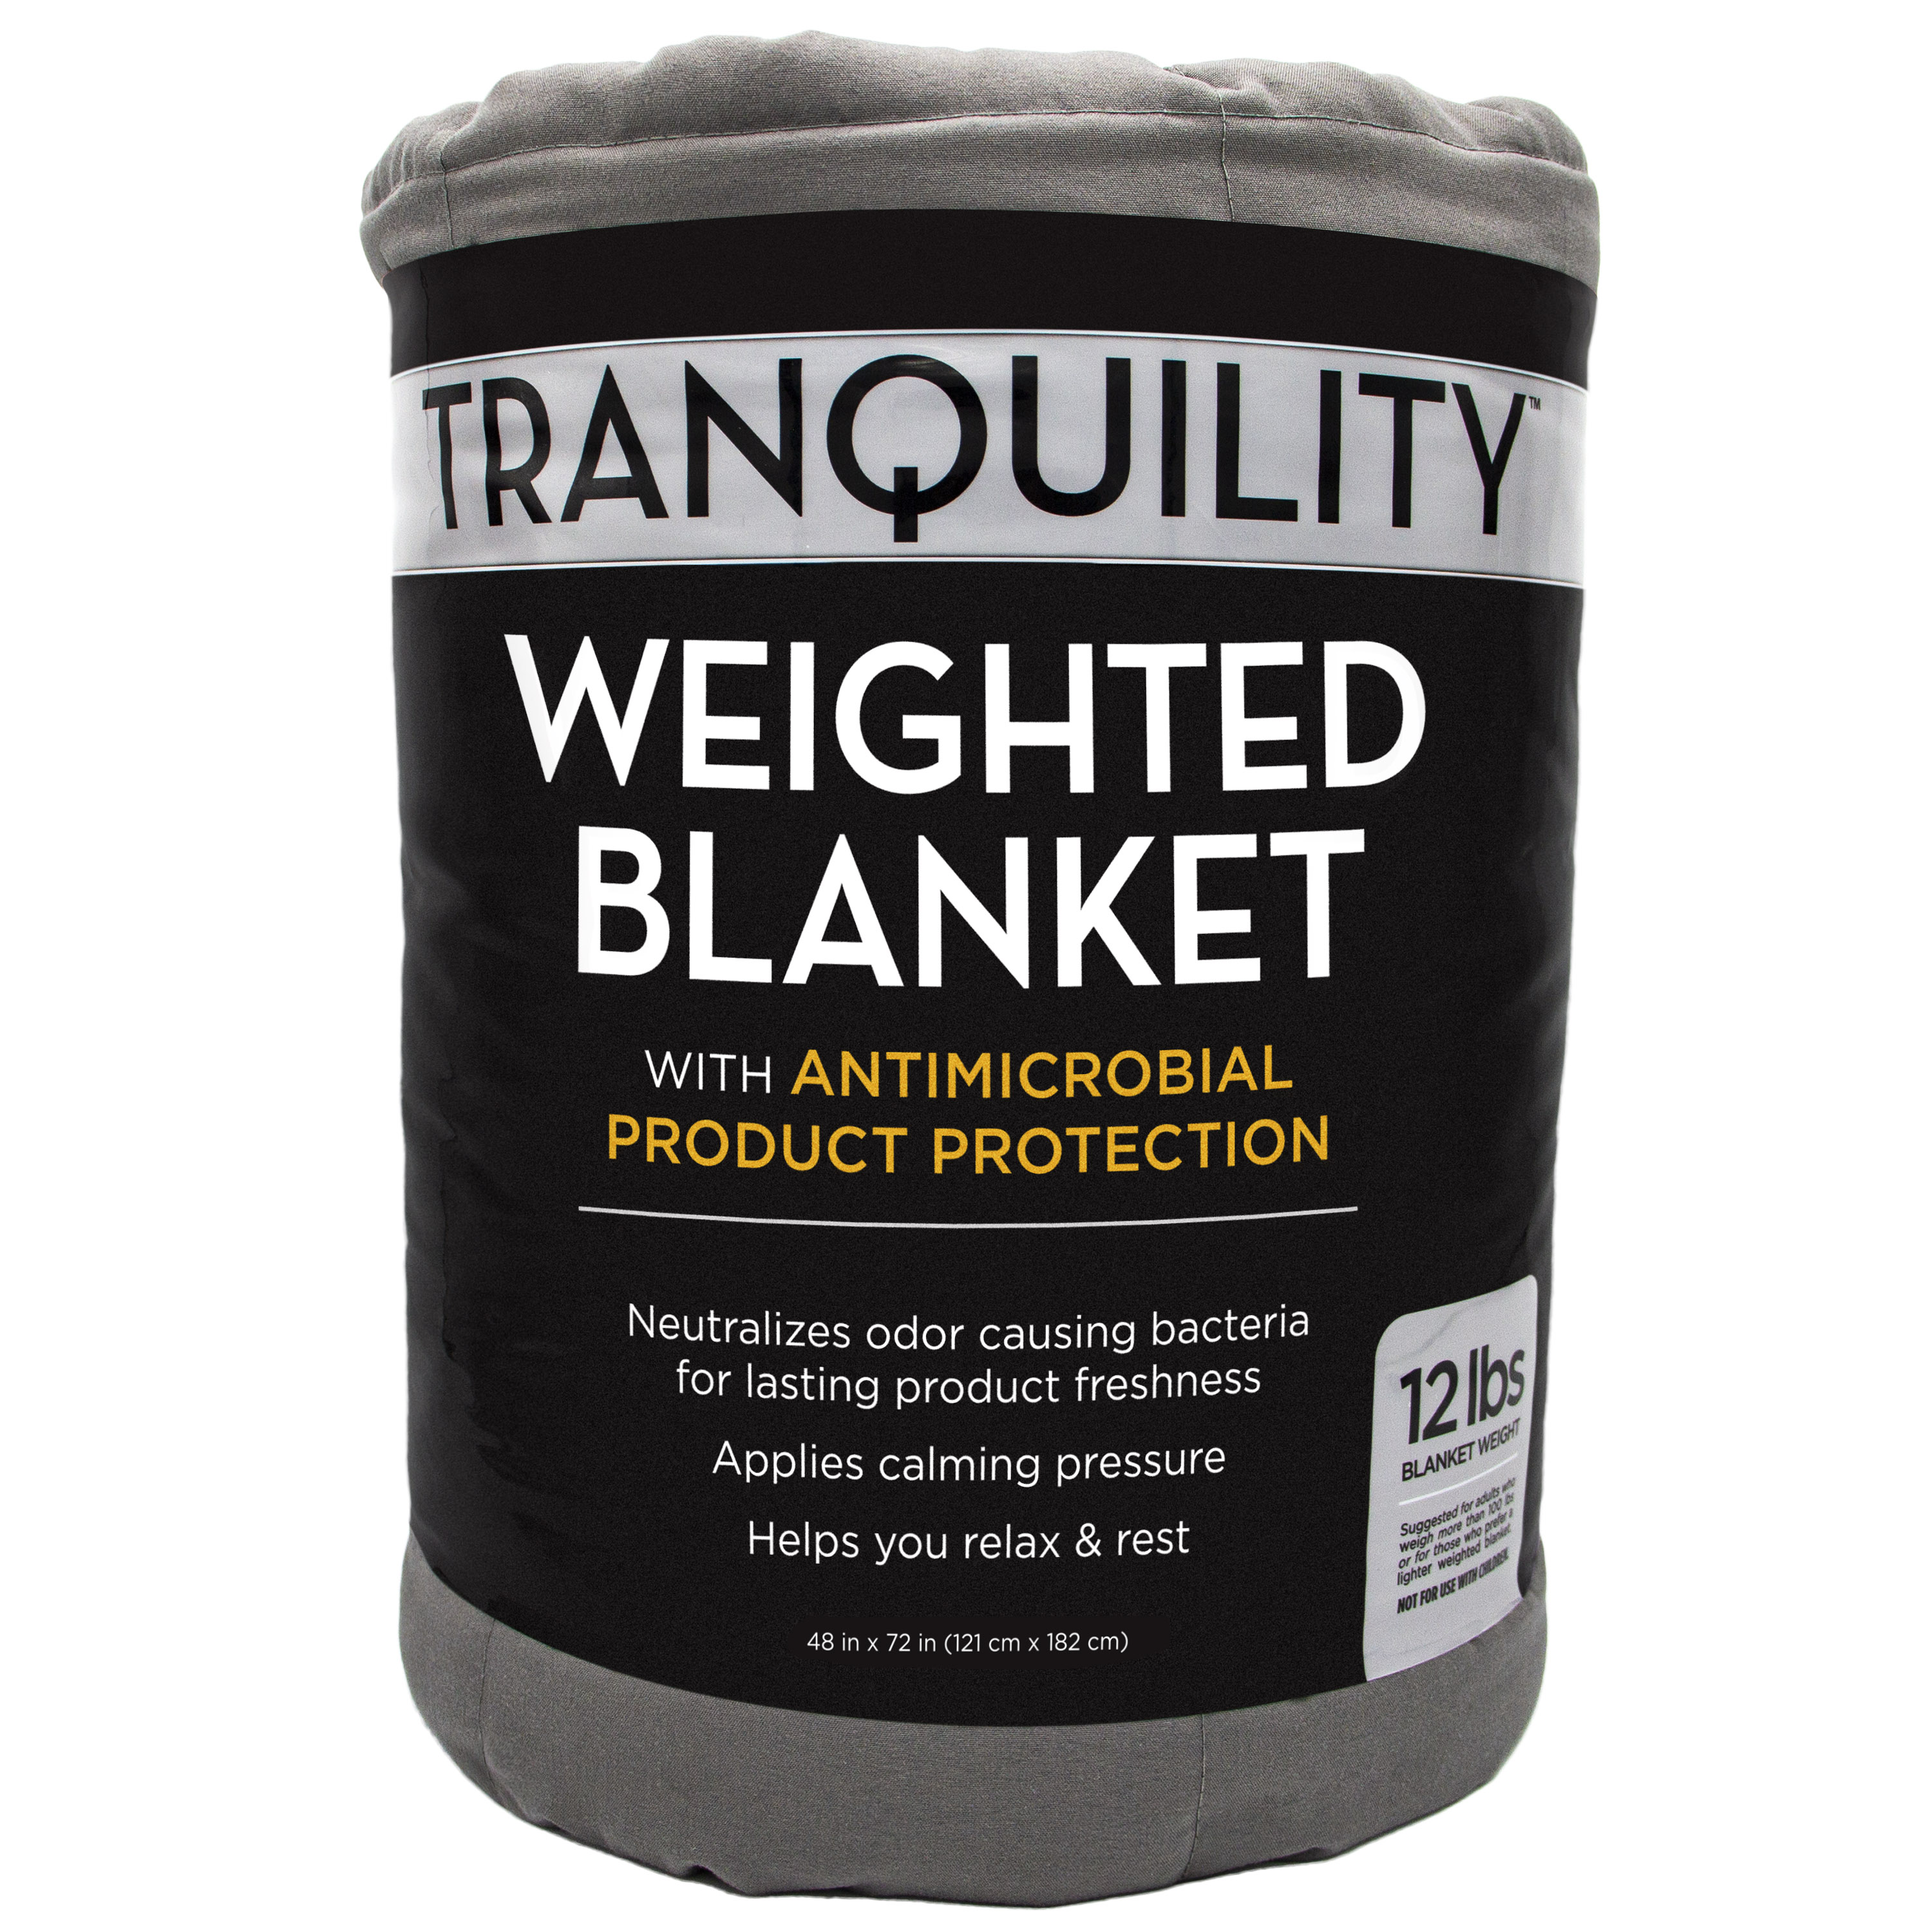 Tranquility Antimicrobial Quilted Weighted Blanket, Gray, 12LB - image 3 of 6